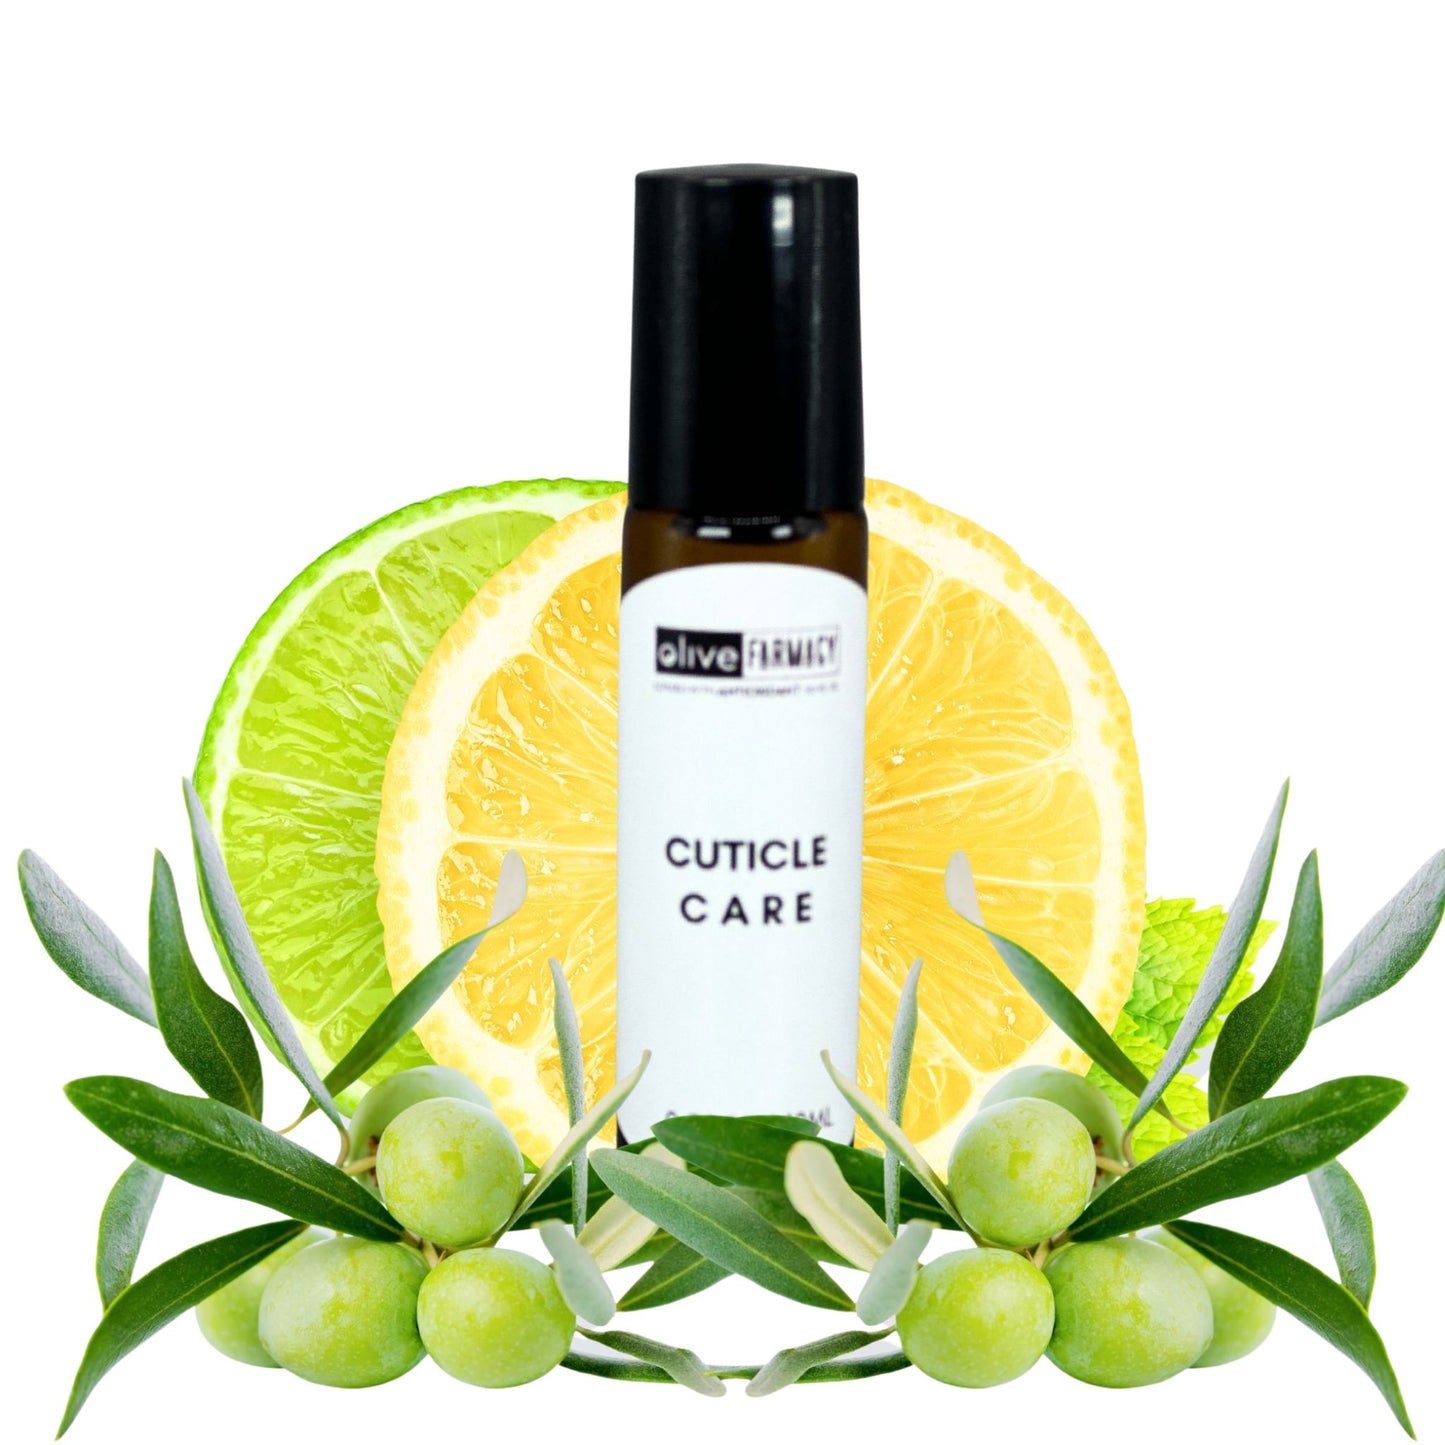 Dry Cracked Cuticle Oil By Olive Farmacy made with high polyphenol olive oil 